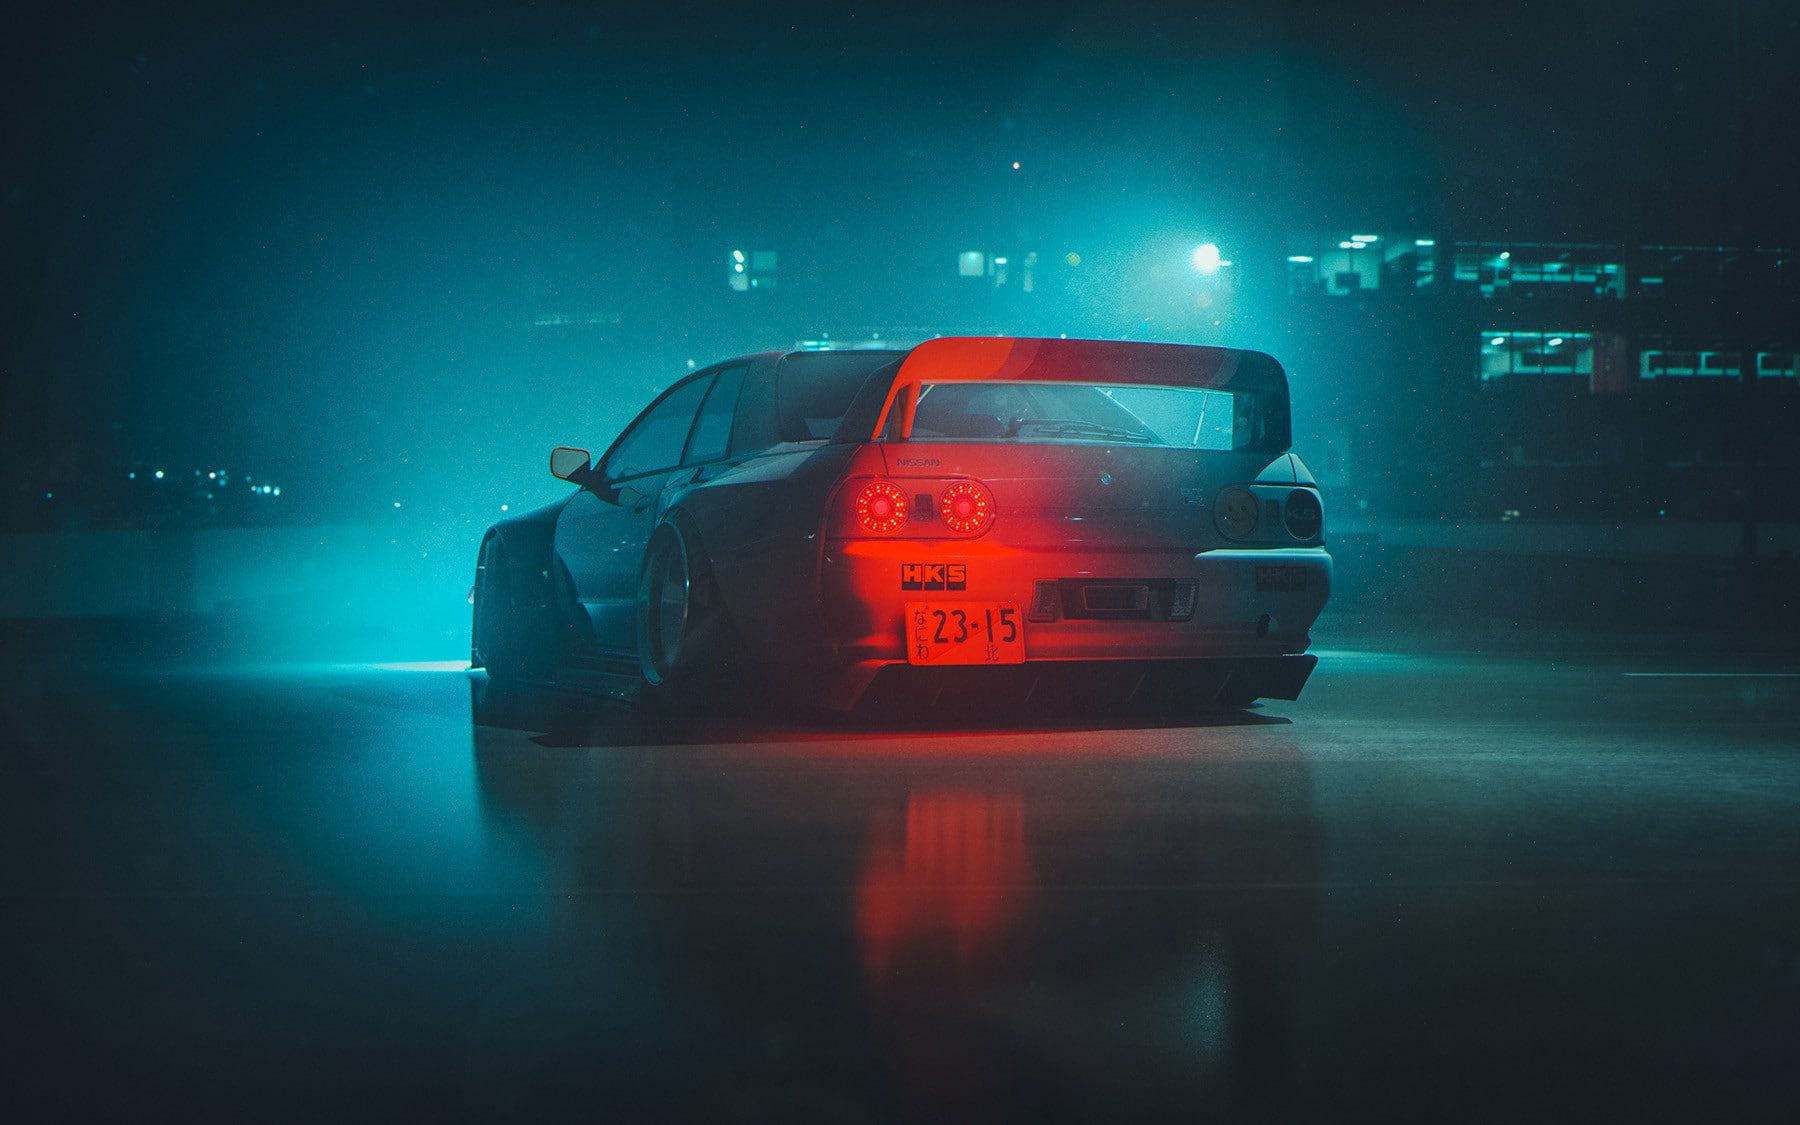 Night Ride IPhone Wallpaper HD  IPhone Wallpapers  iPhone Wallpapers